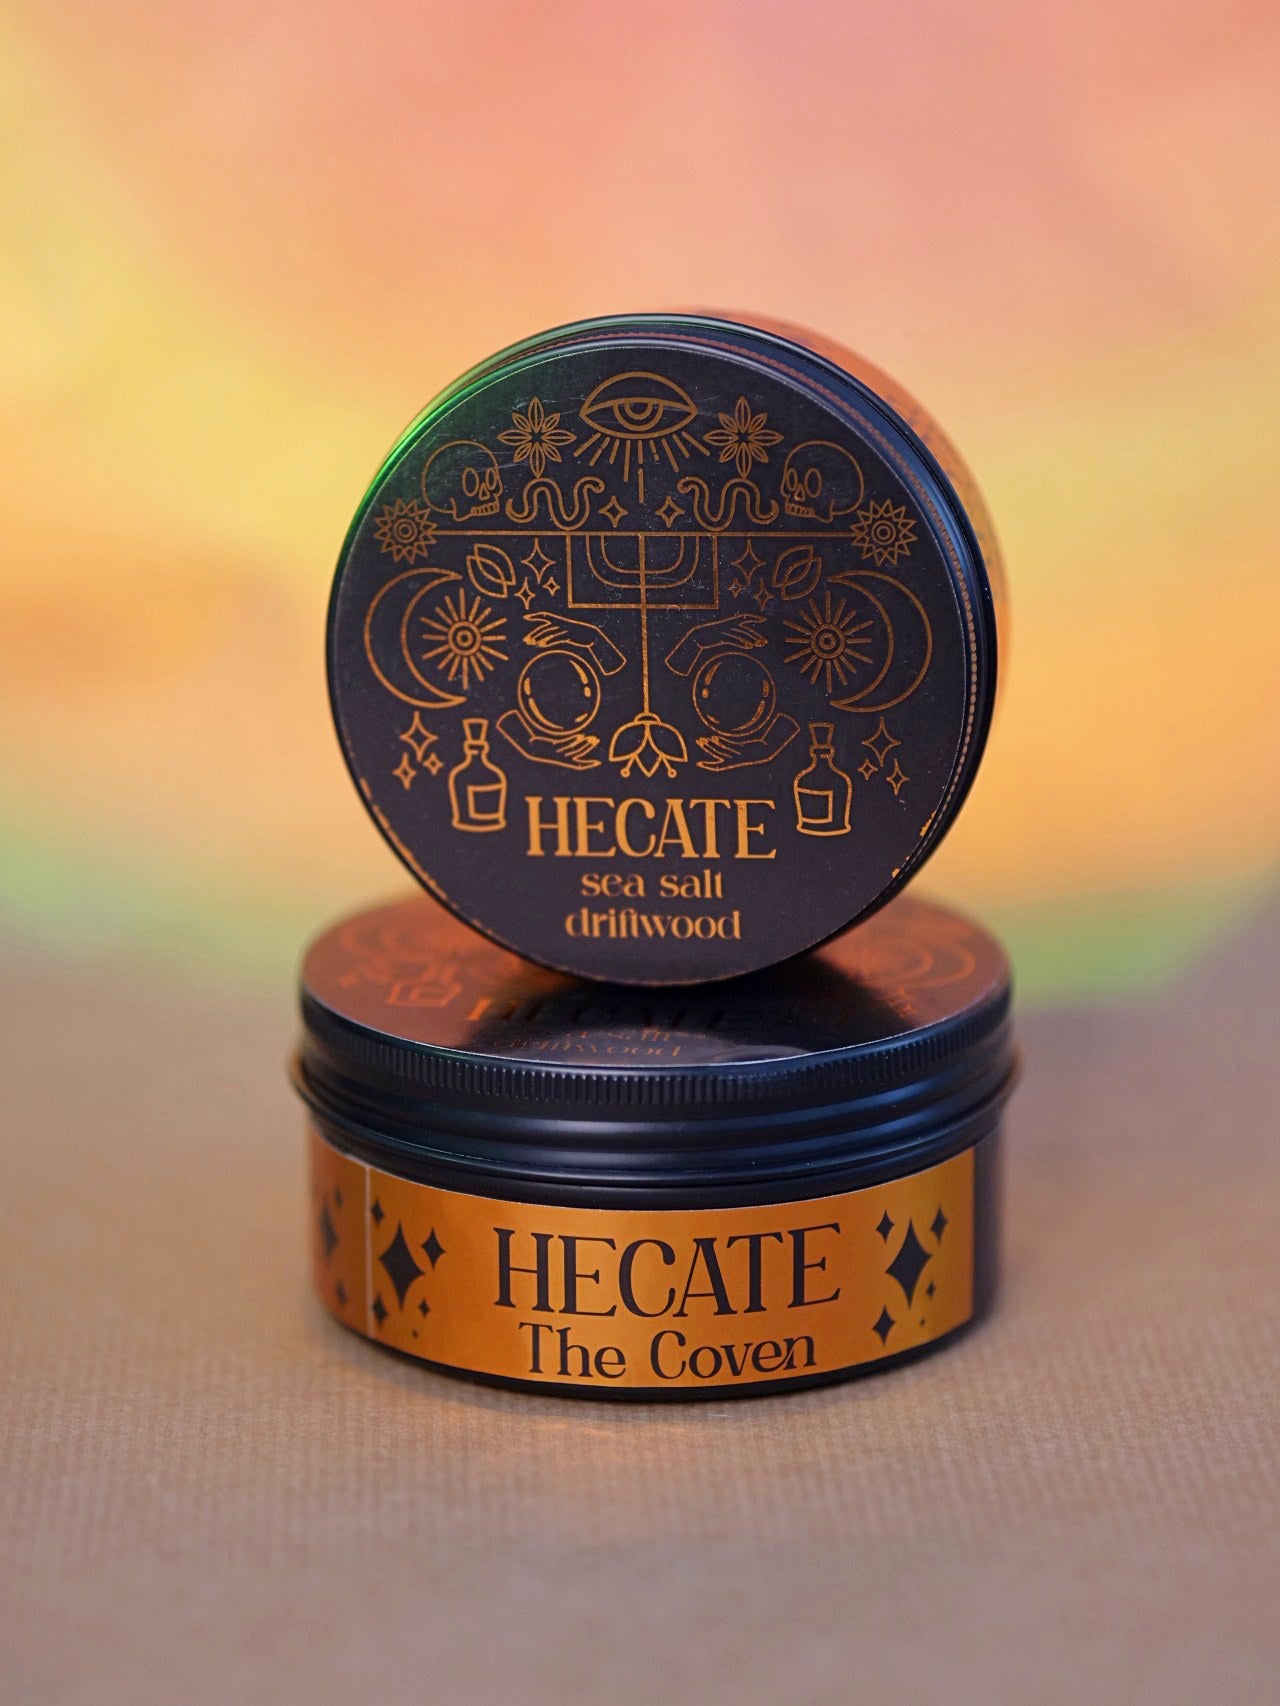 The Coven: Hecate